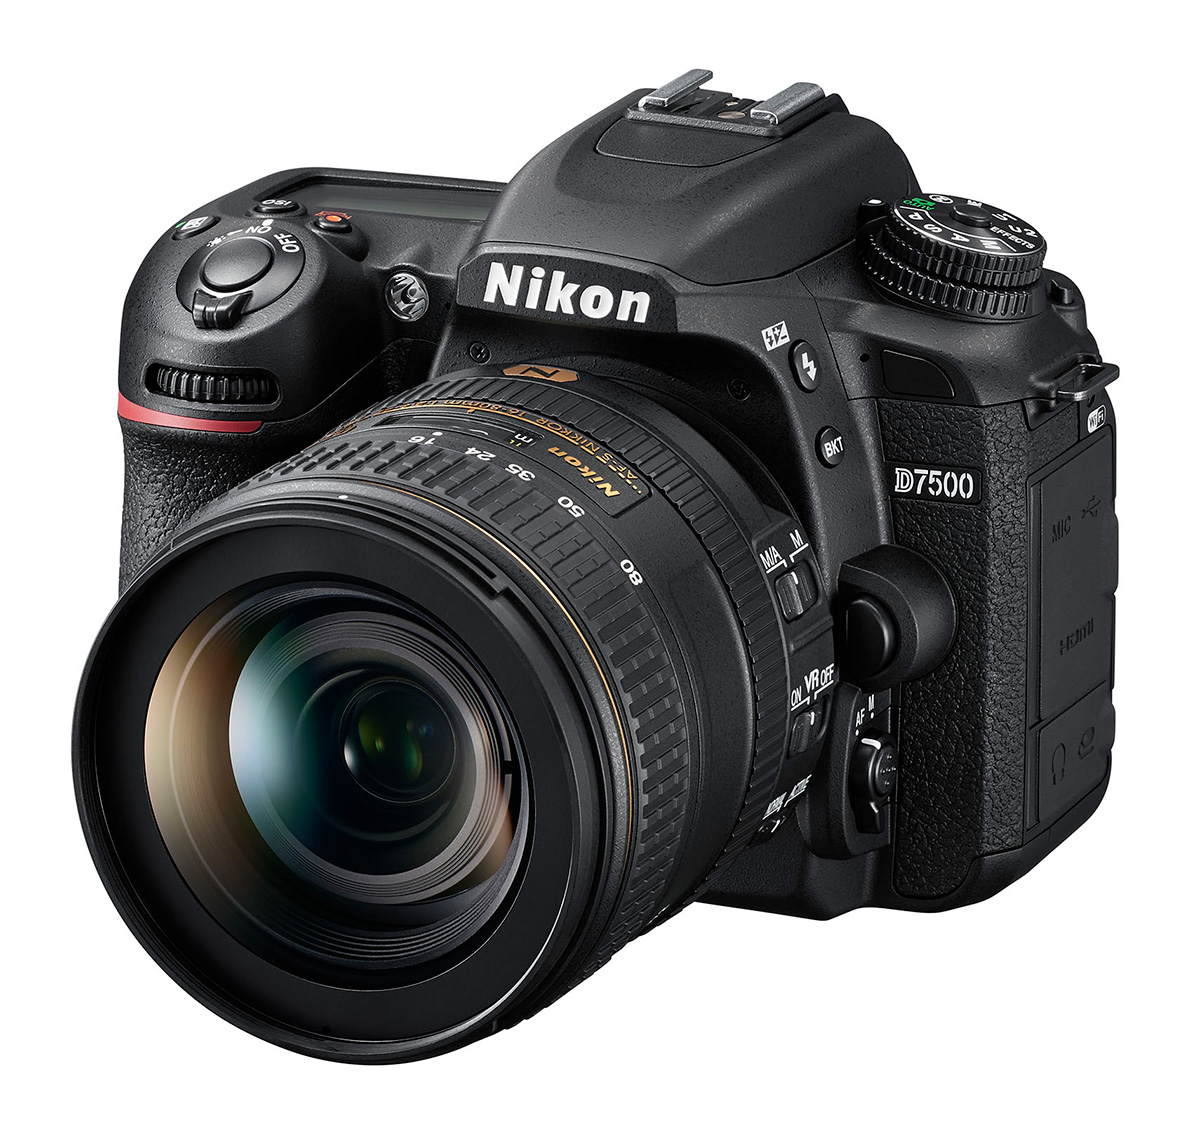 New Nikon: Catch the shot of a lifetime with the all-new Nikon D7500 ...